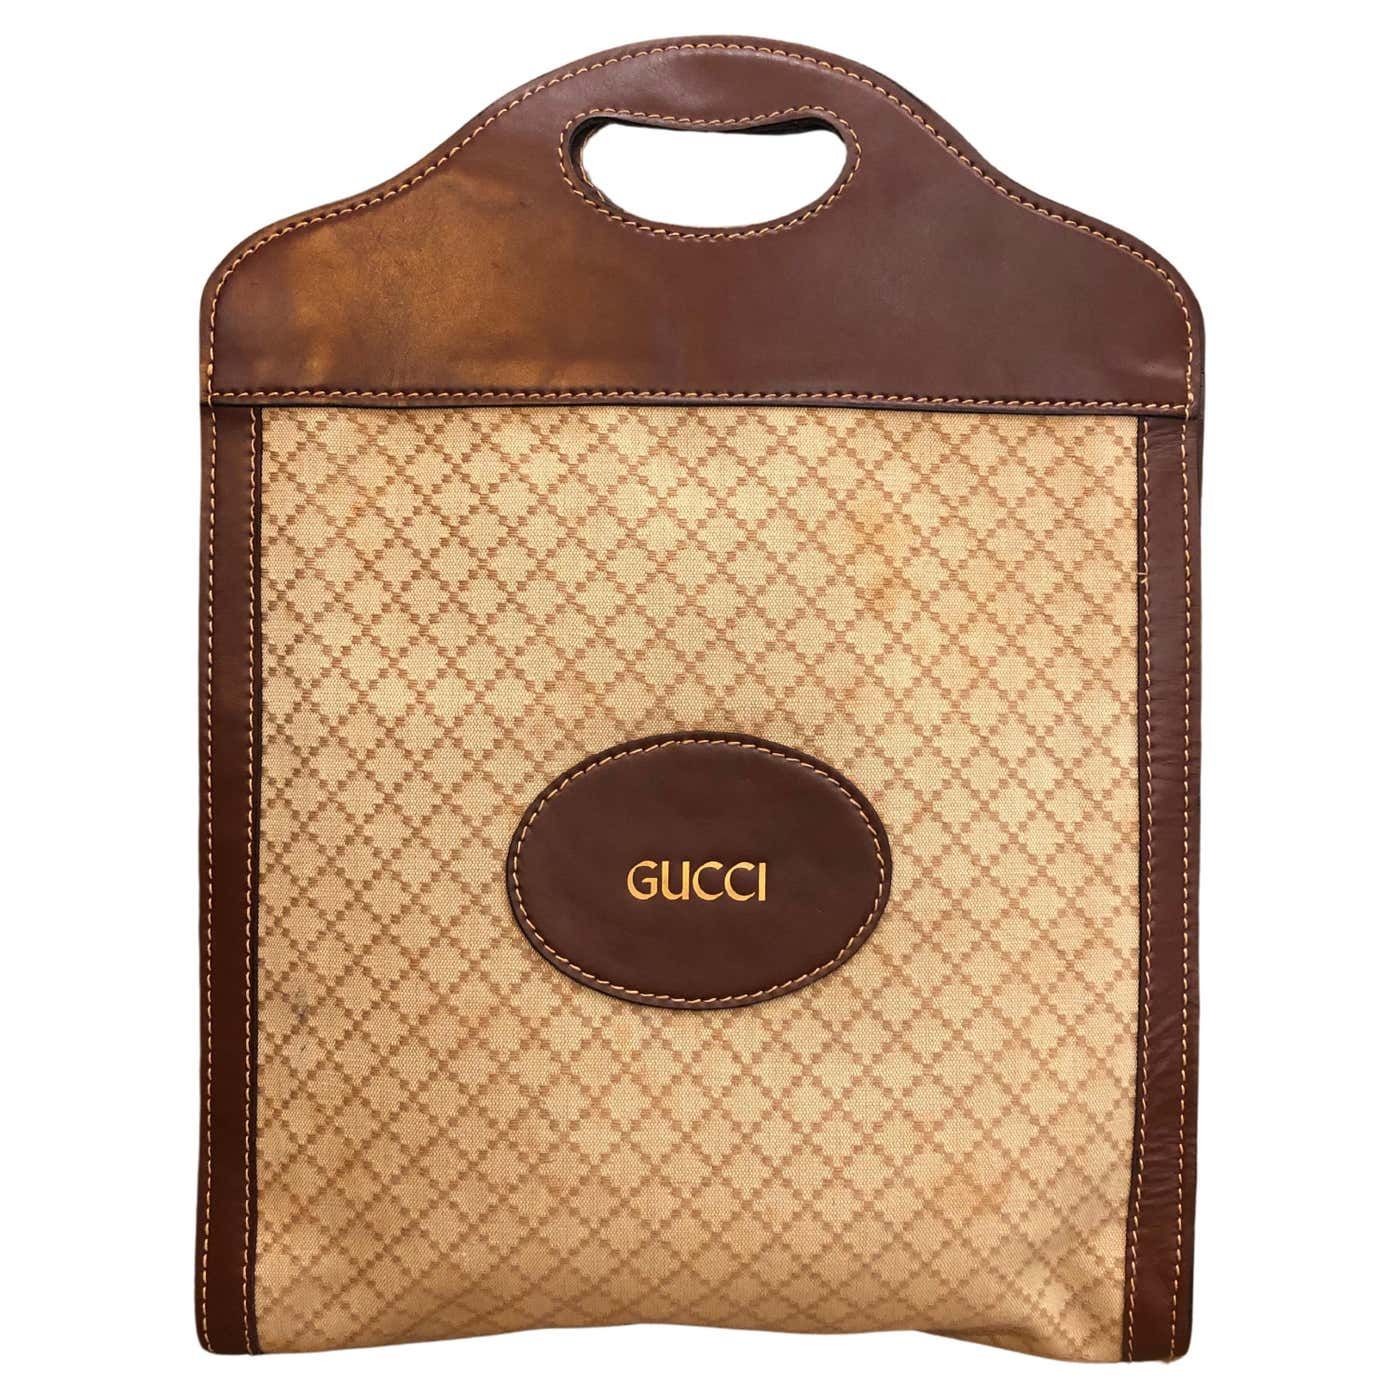 Discover 75+ gucci carry bag latest - in.duhocakina